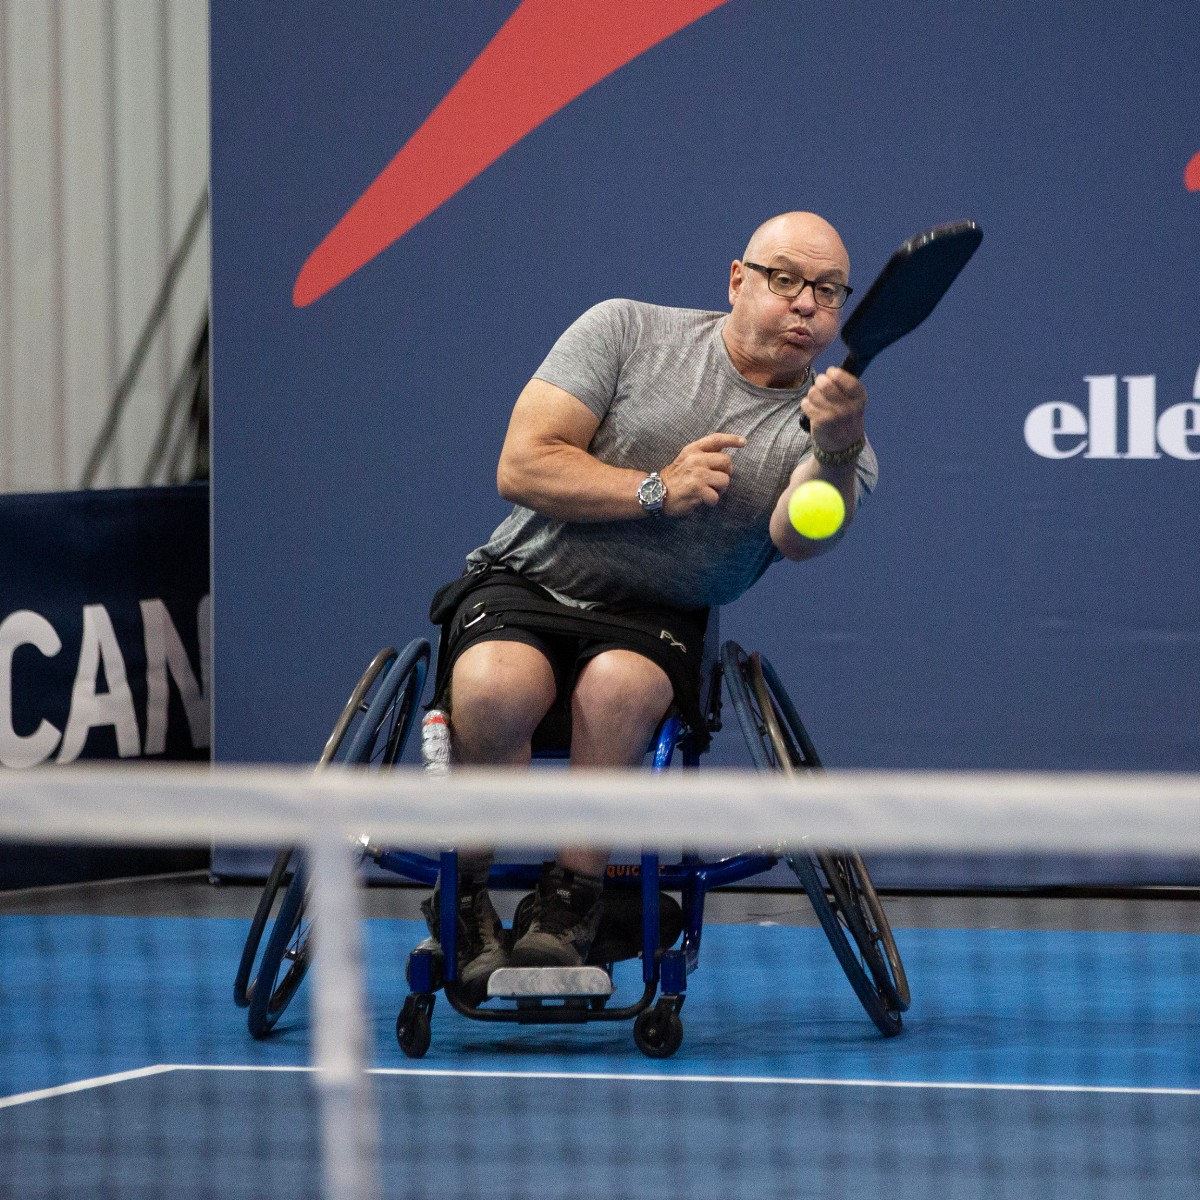 Wheelchair pickleball taster session! Join us on Saturday 27th April from 2pm-4pm to give this developing sport a try in a wheelchair. Sports wheelchairs will be provided as well as bats and balls. Find out more here: brnw.ch/21wIMXT